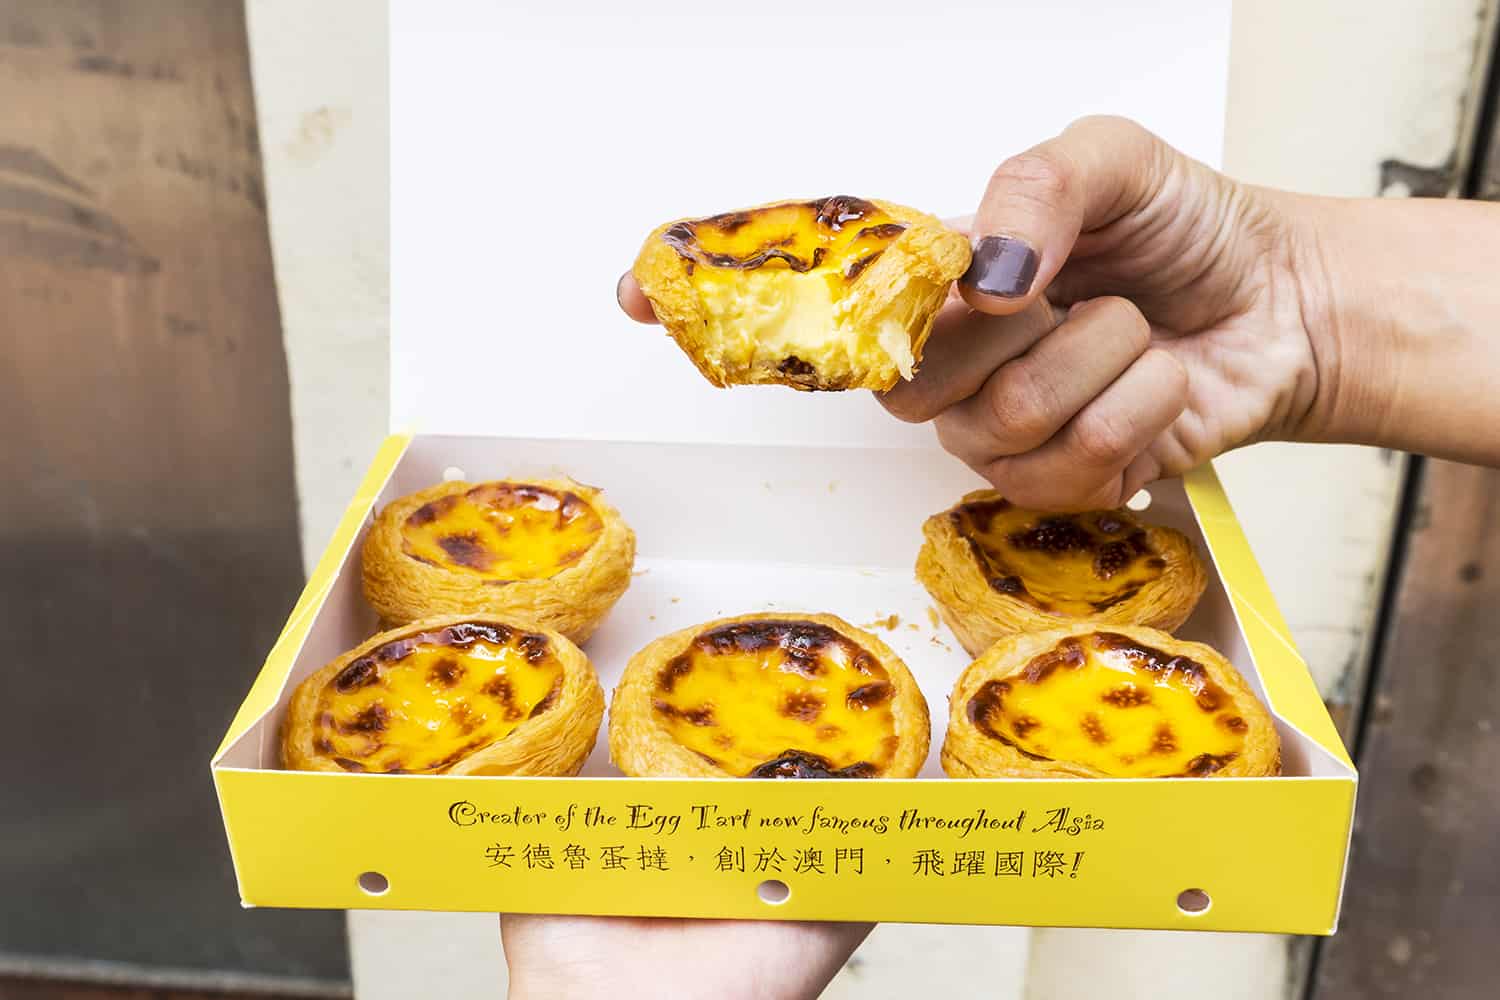 Lord Stow's Portuguese Egg Tarts